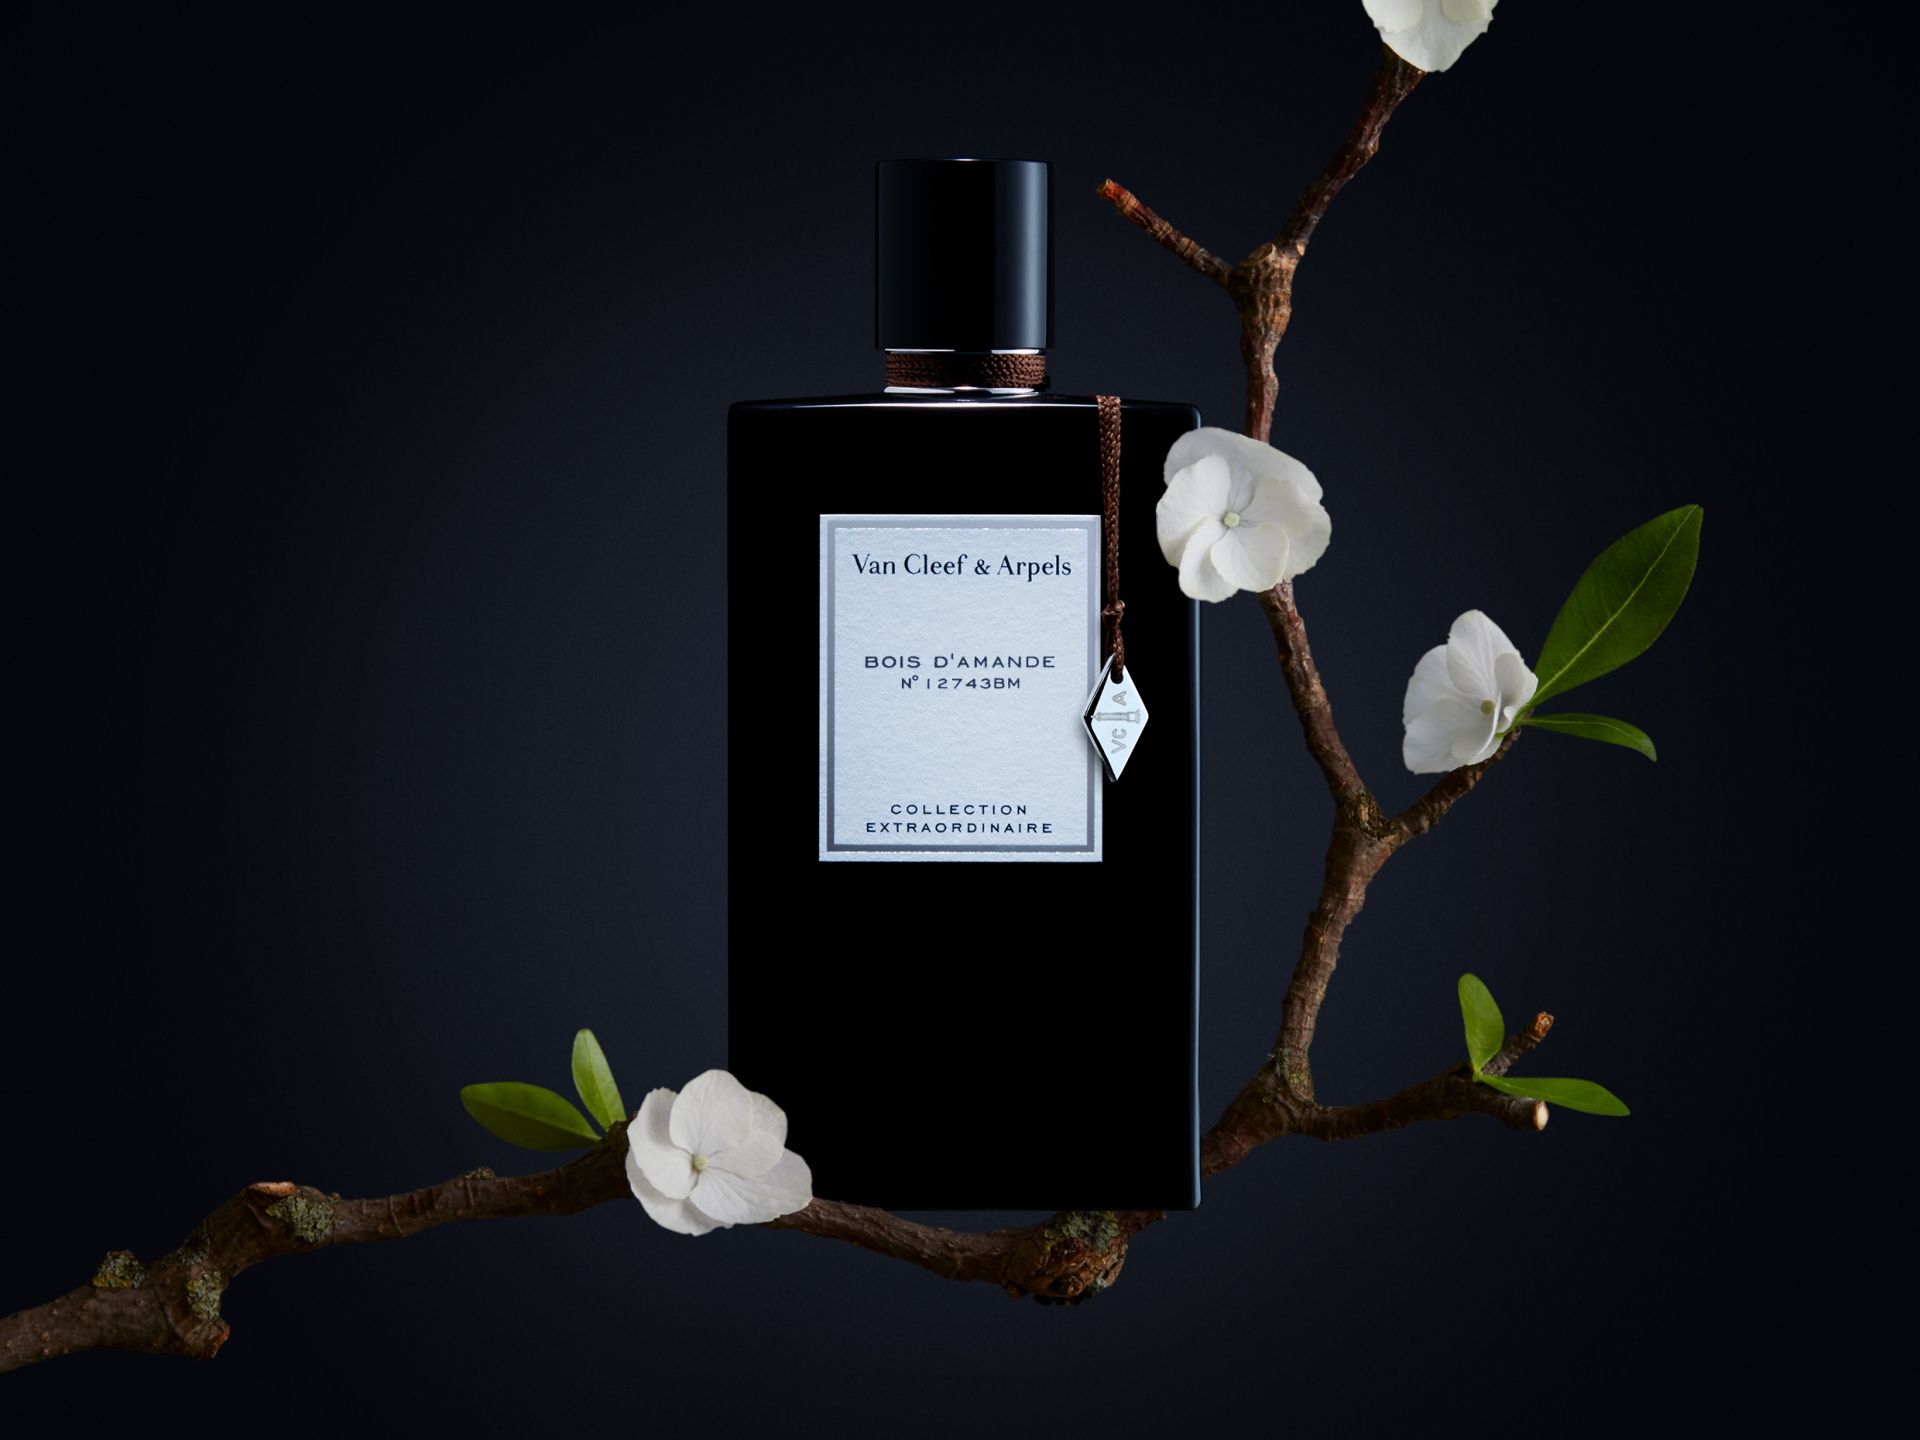 Van Cleef & Arpels adds Bois d'Amande to its woody fragrance collection